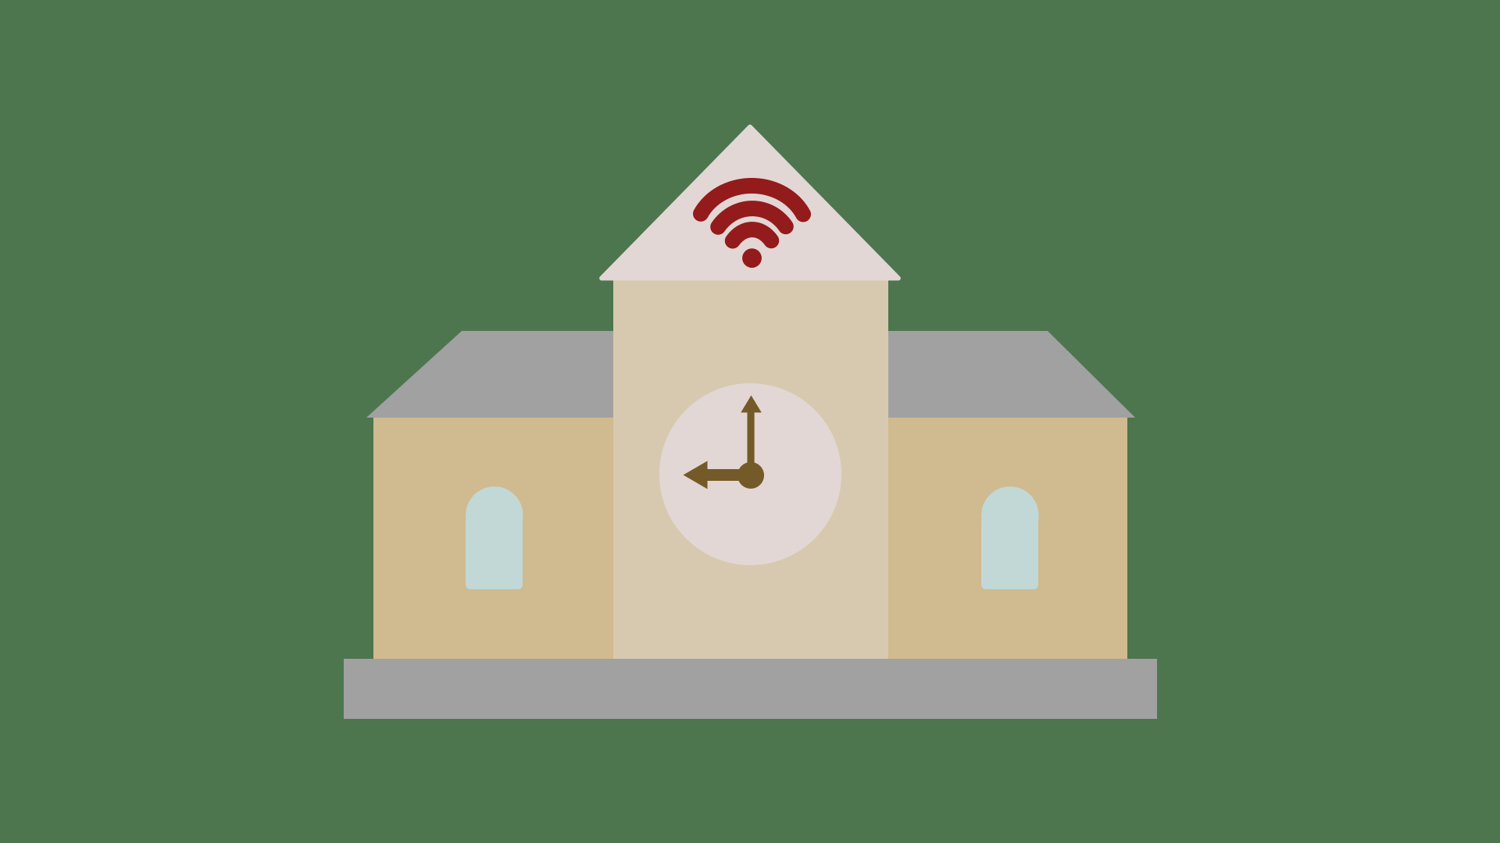 Why do you need a VPN at school?